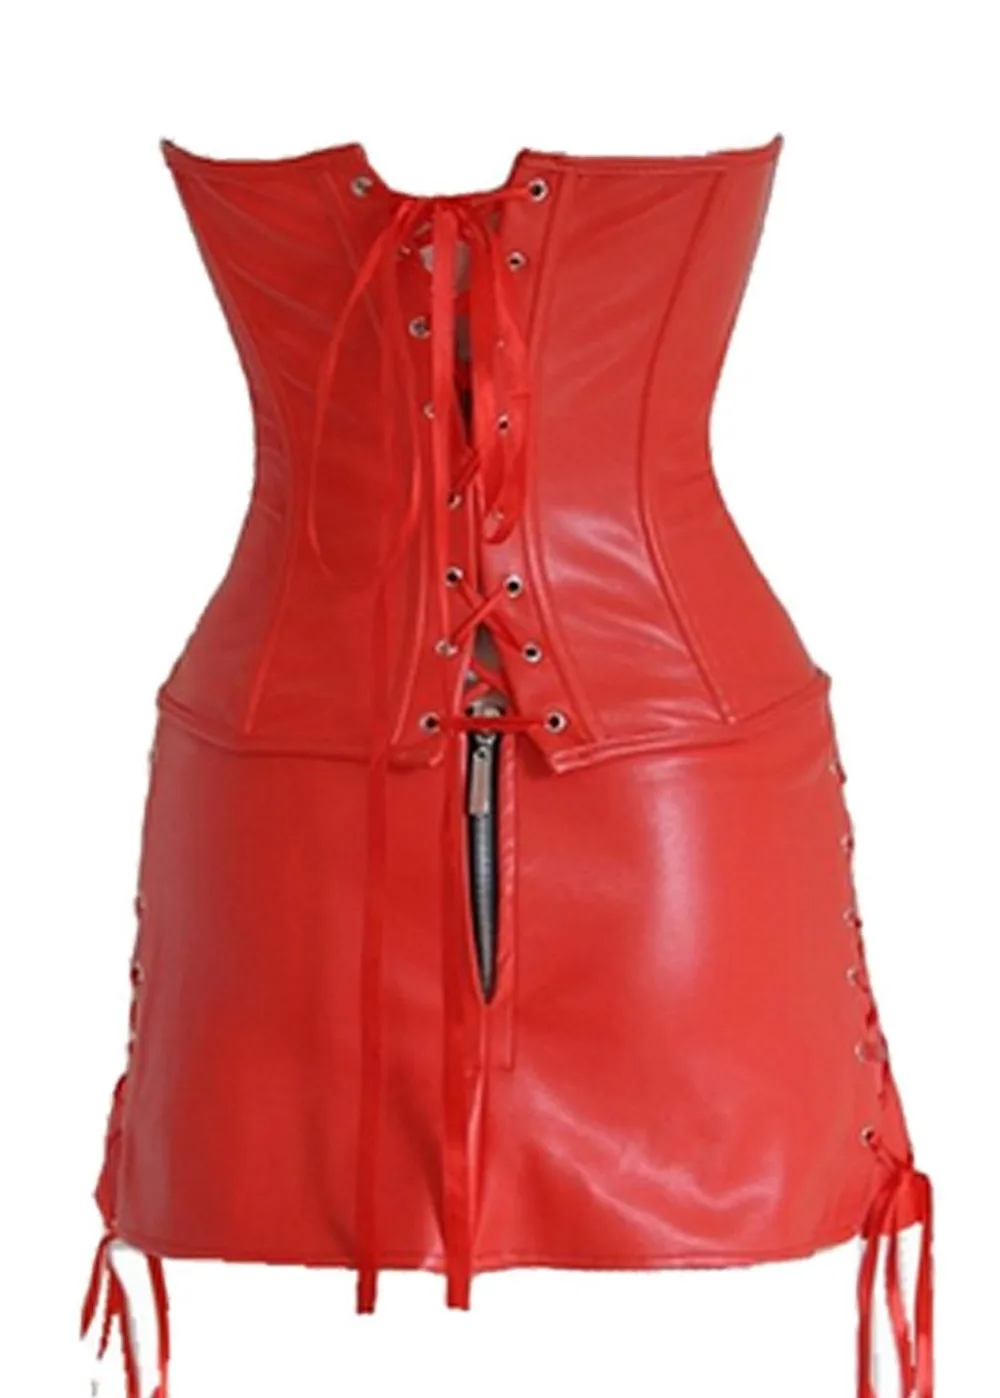 Sexy Steampunk Corsets and Bustiers Gothic Overbust Corset with Mini Skirt Plus Size S-6XL Faux Leather Bustier Dress